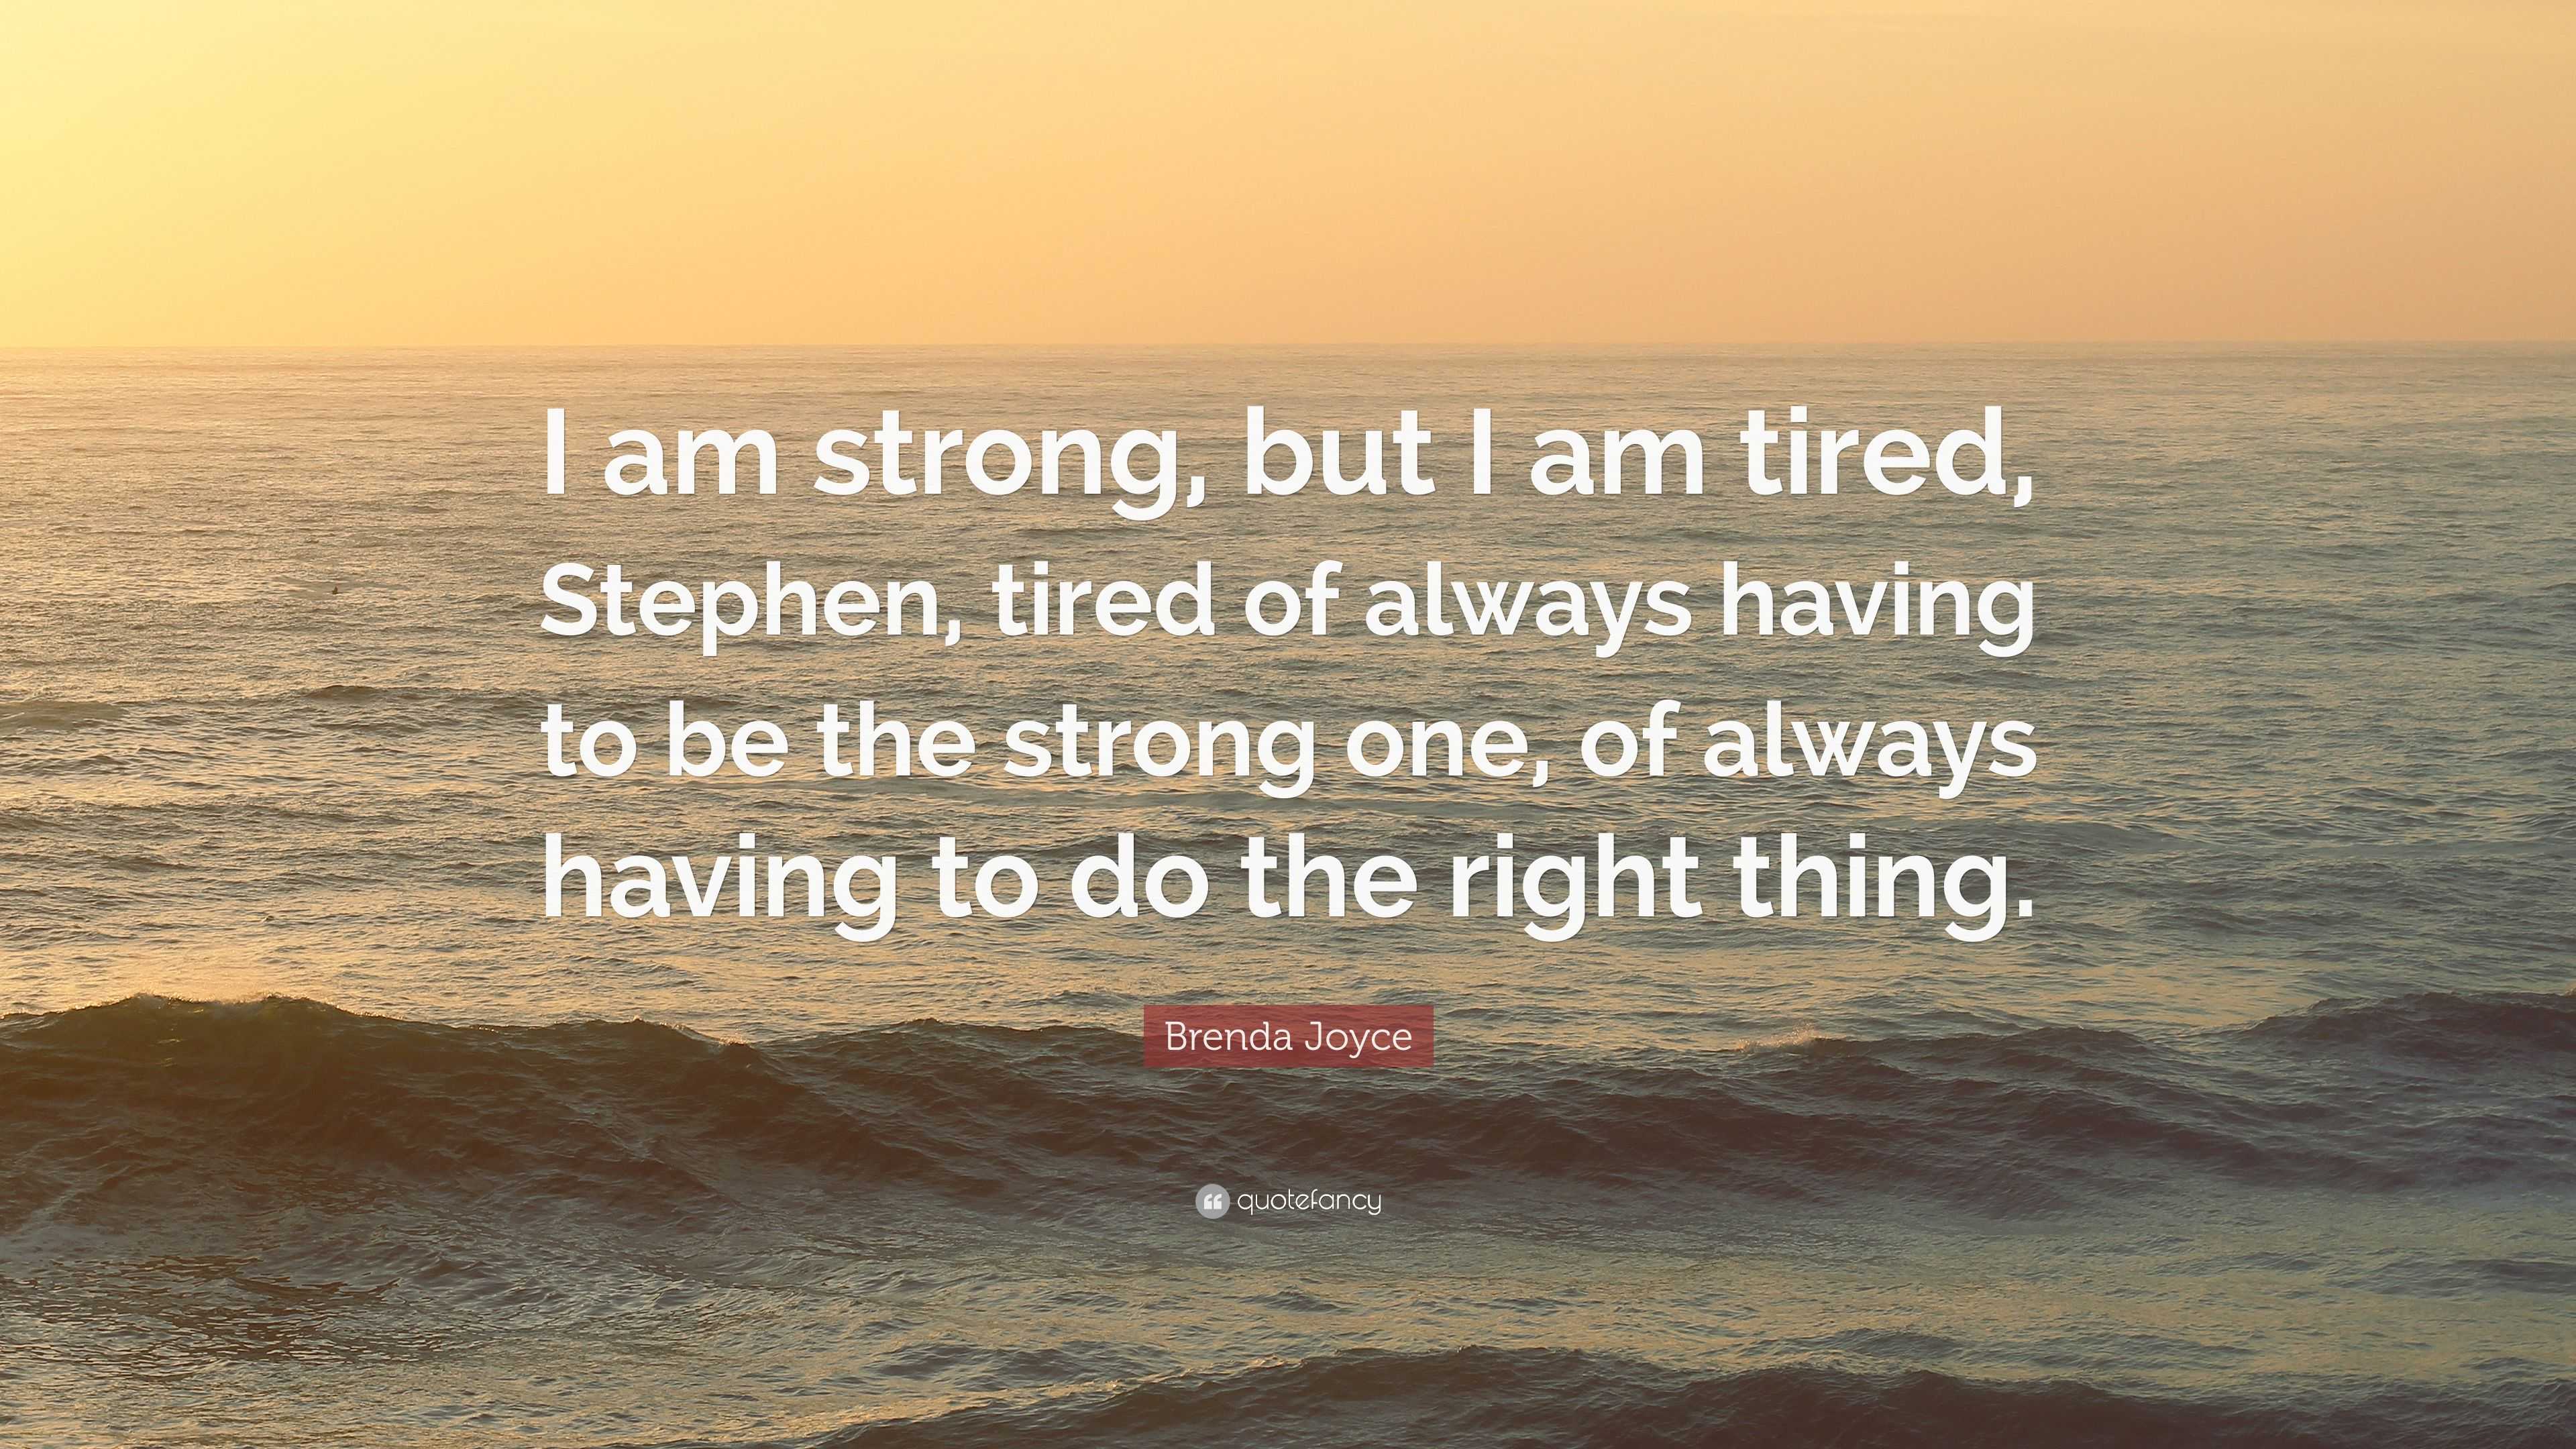 Brenda Joyce Quote: “I am strong, but I am tired, Stephen, tired of